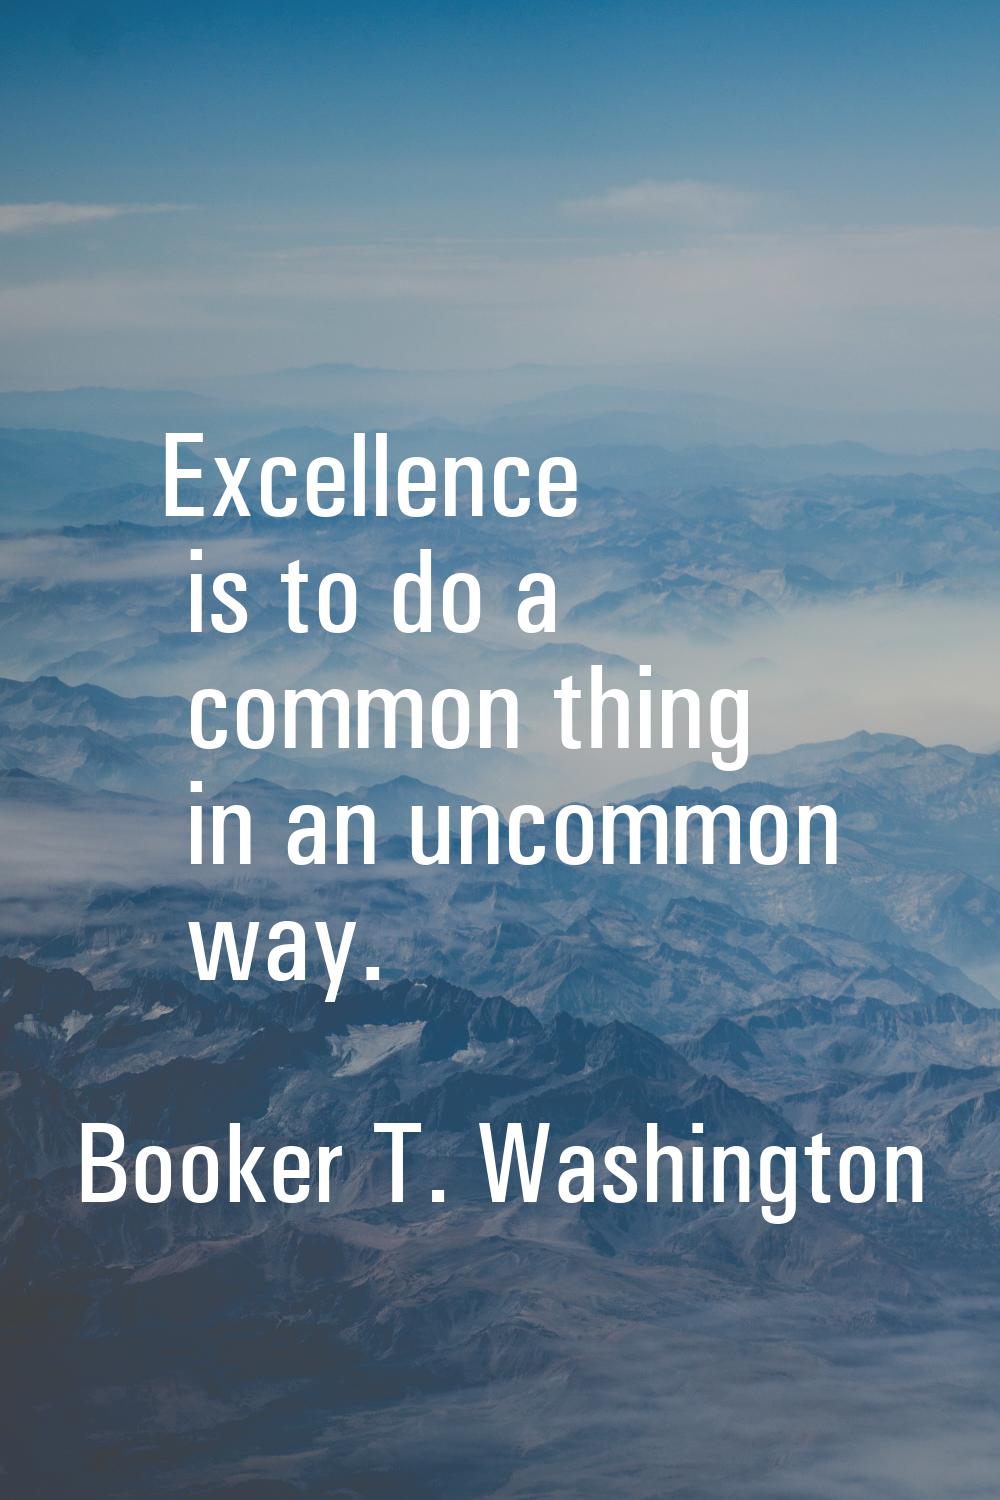 Excellence is to do a common thing in an uncommon way.